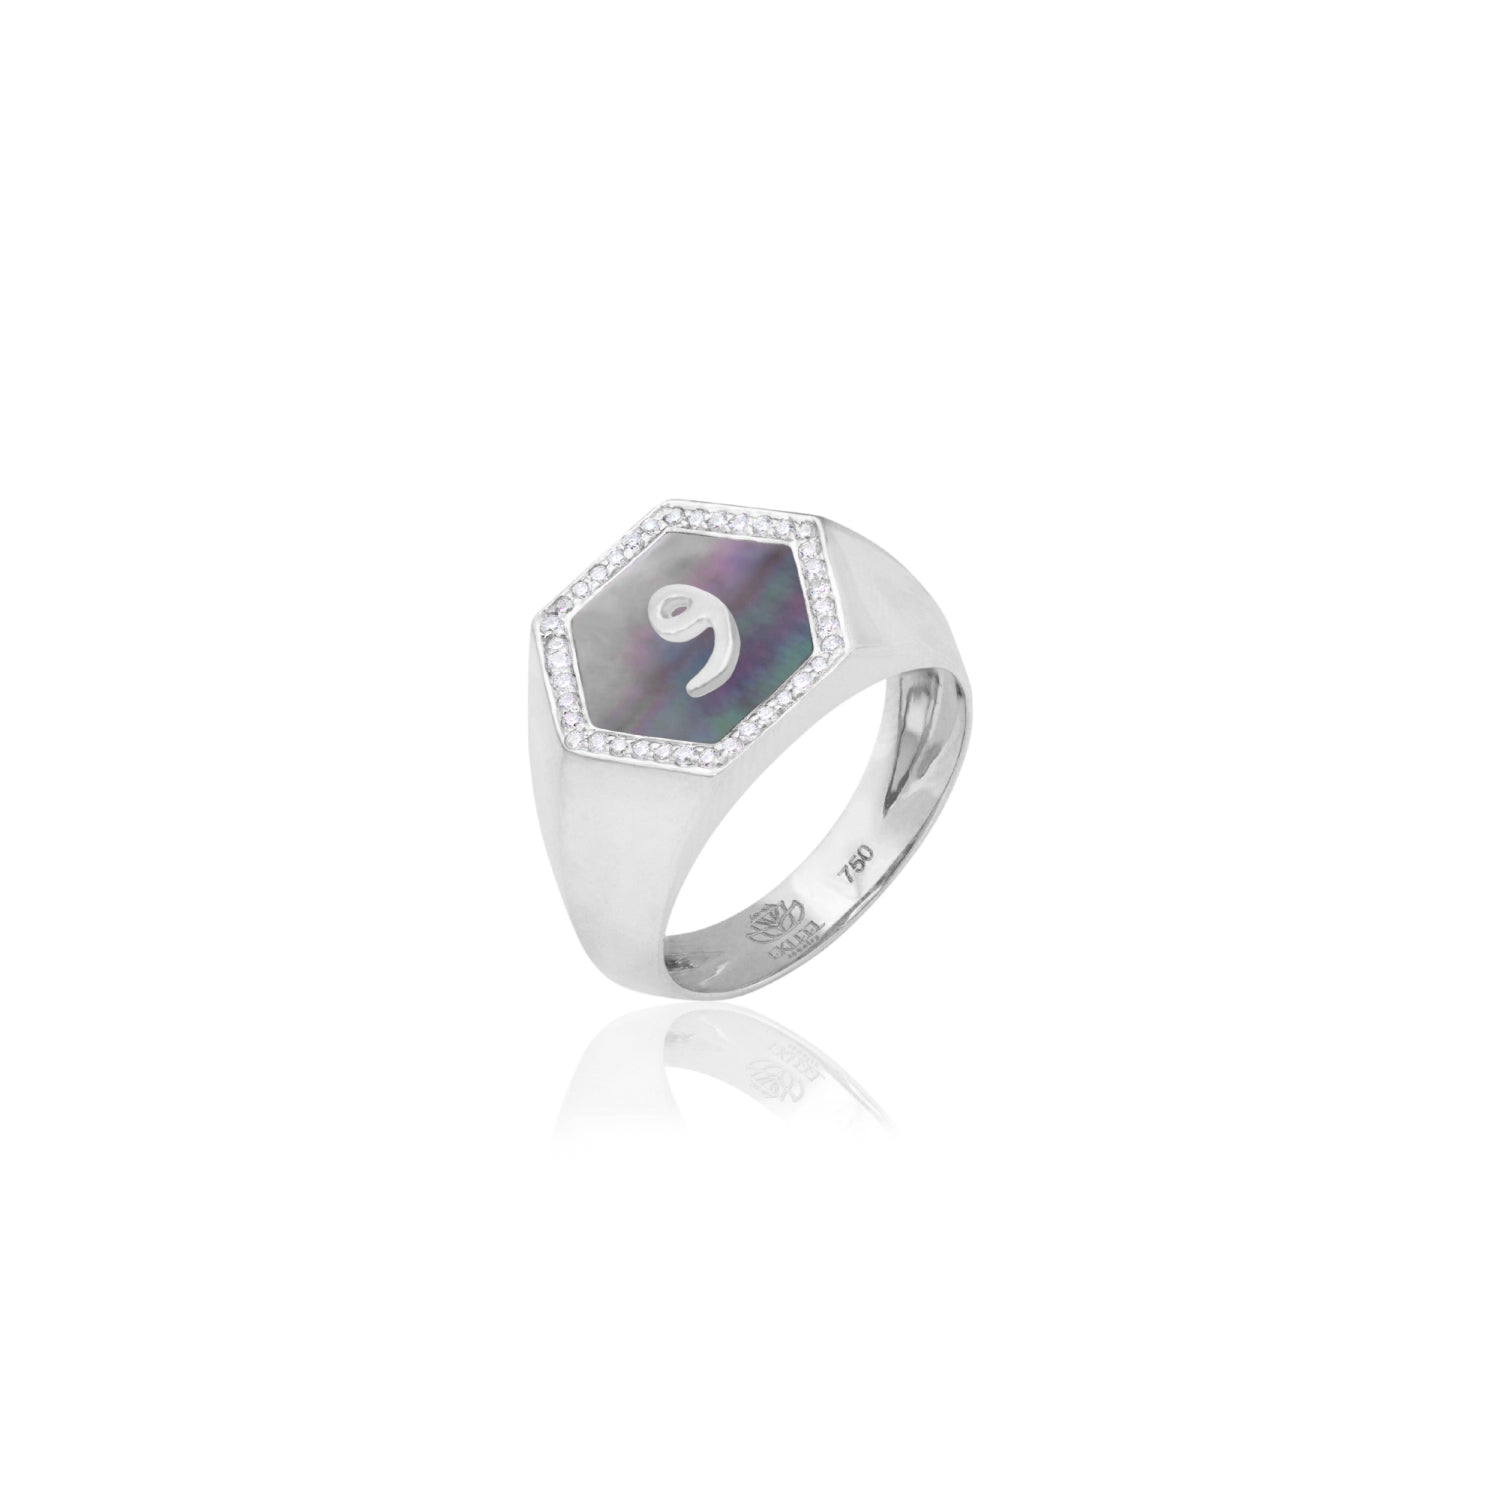 Qamoos 2.0 Letter و Black Mother of Pearl and Diamond Signet Ring in White Gold